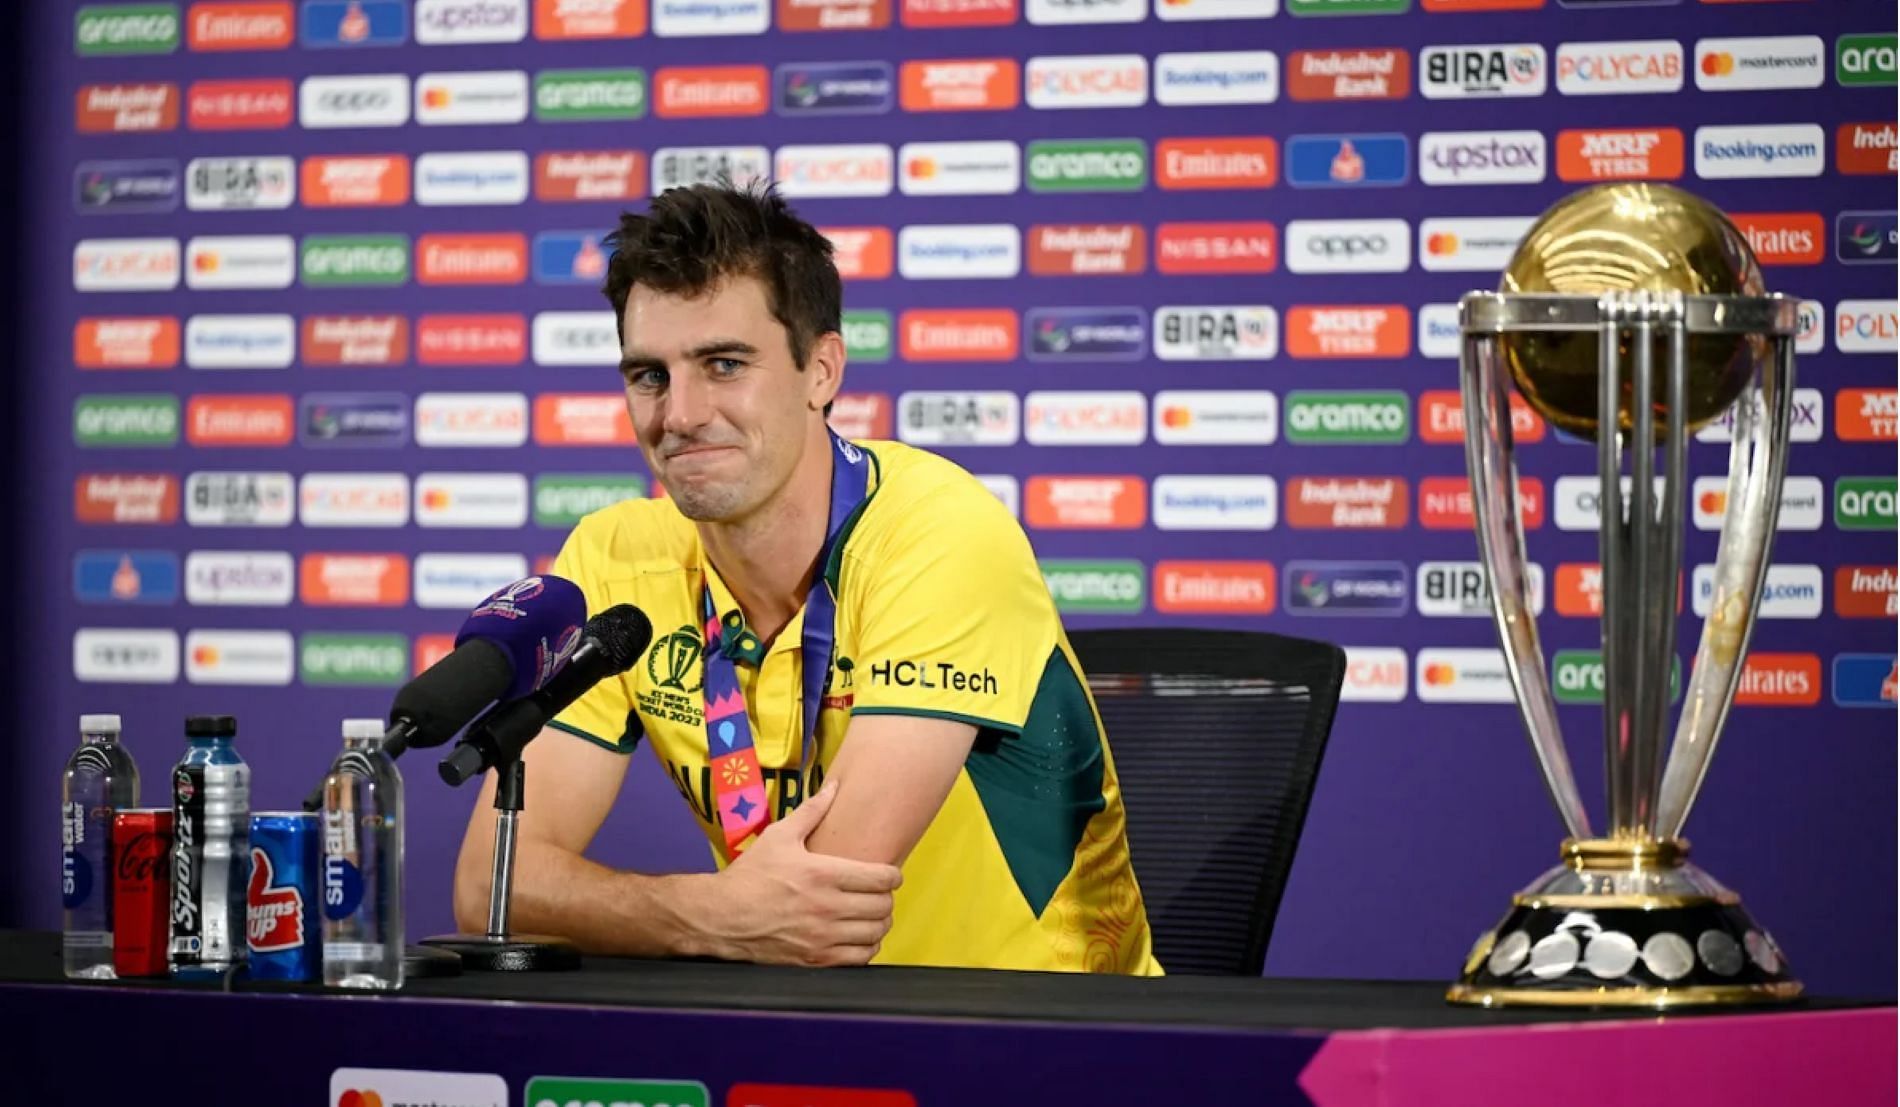 Pat Cummins could not hide his smile after winning the ODI World Cup title.